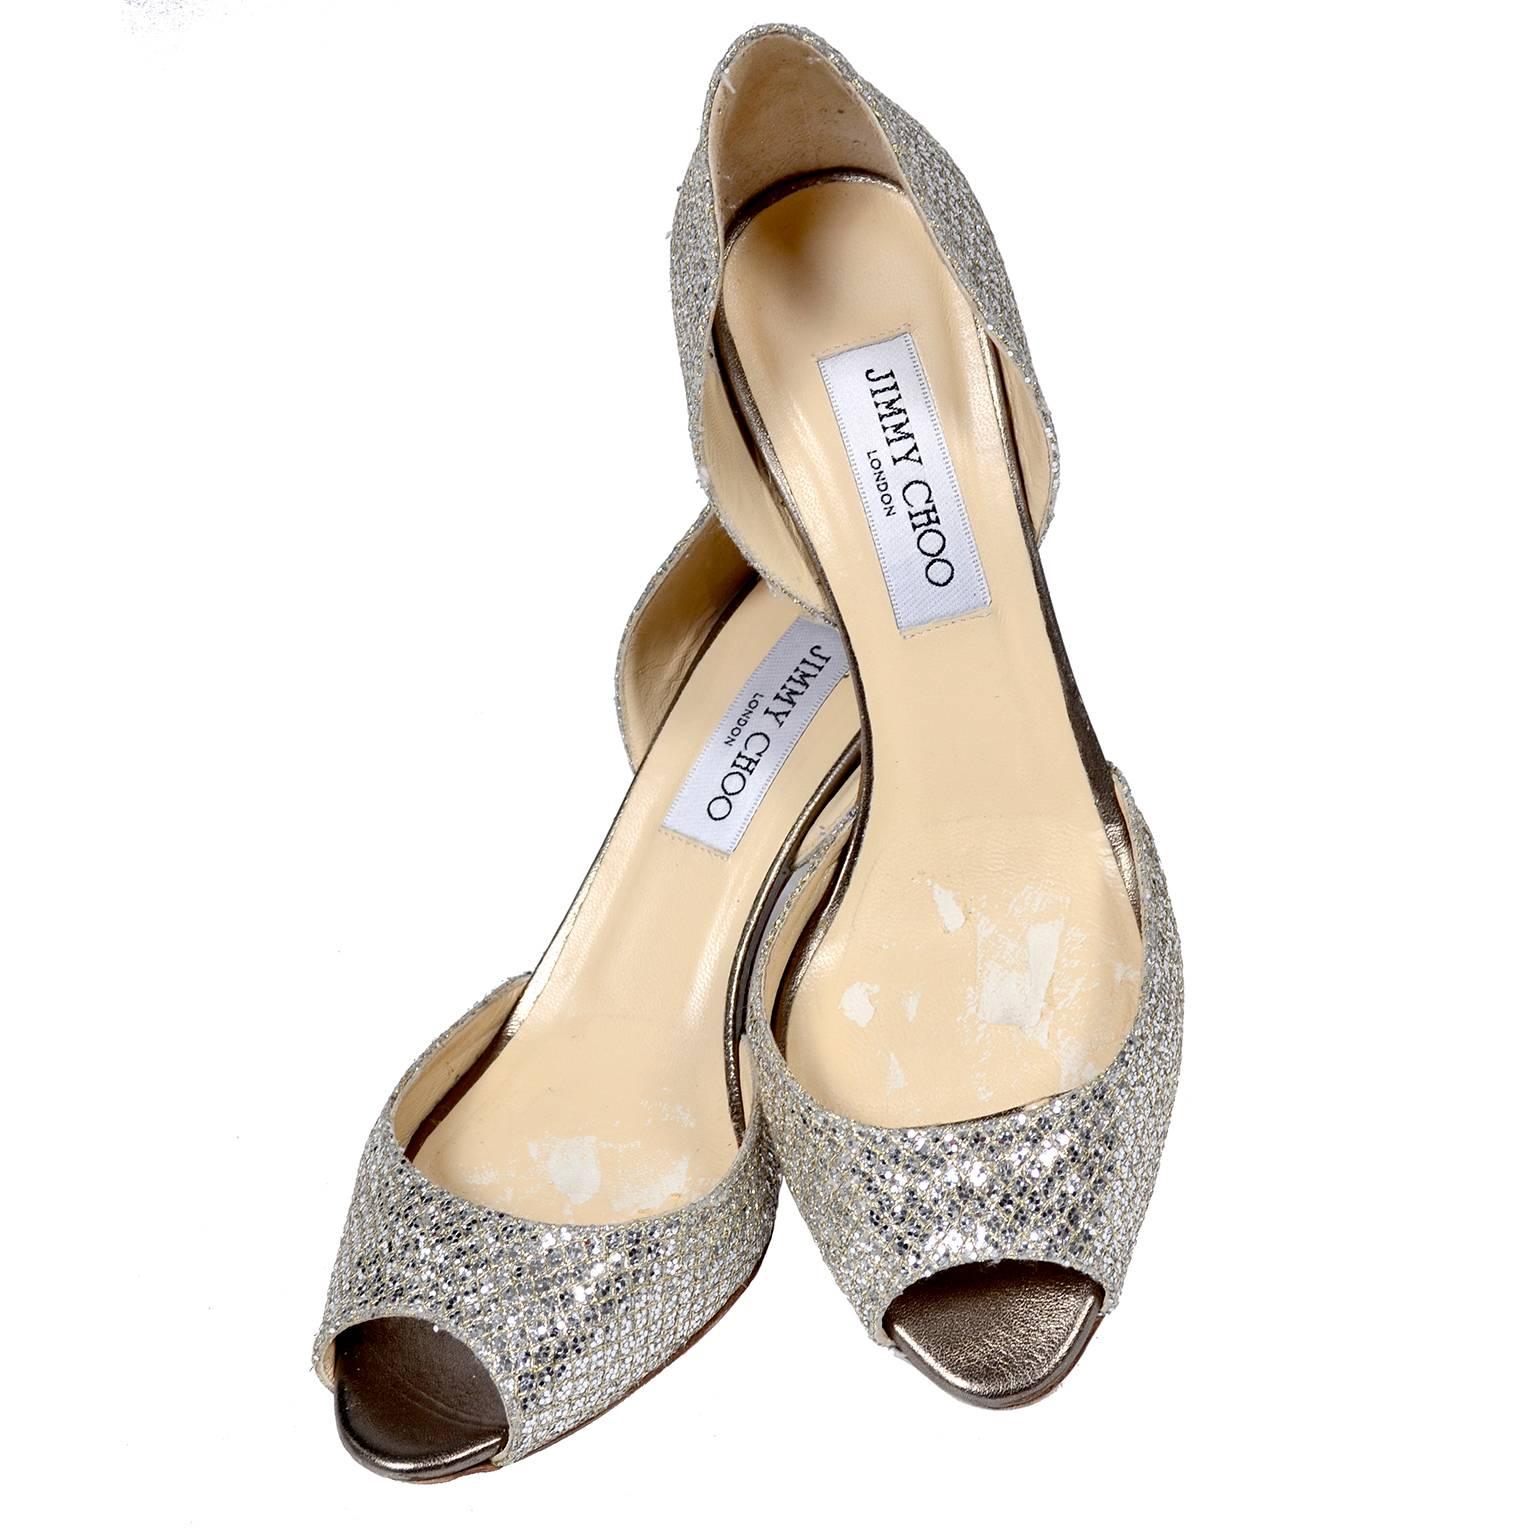 Jimmy Choo Shoes D'Orsay Pumps in Glitter Champagne Size 37.5 W/ Box ...